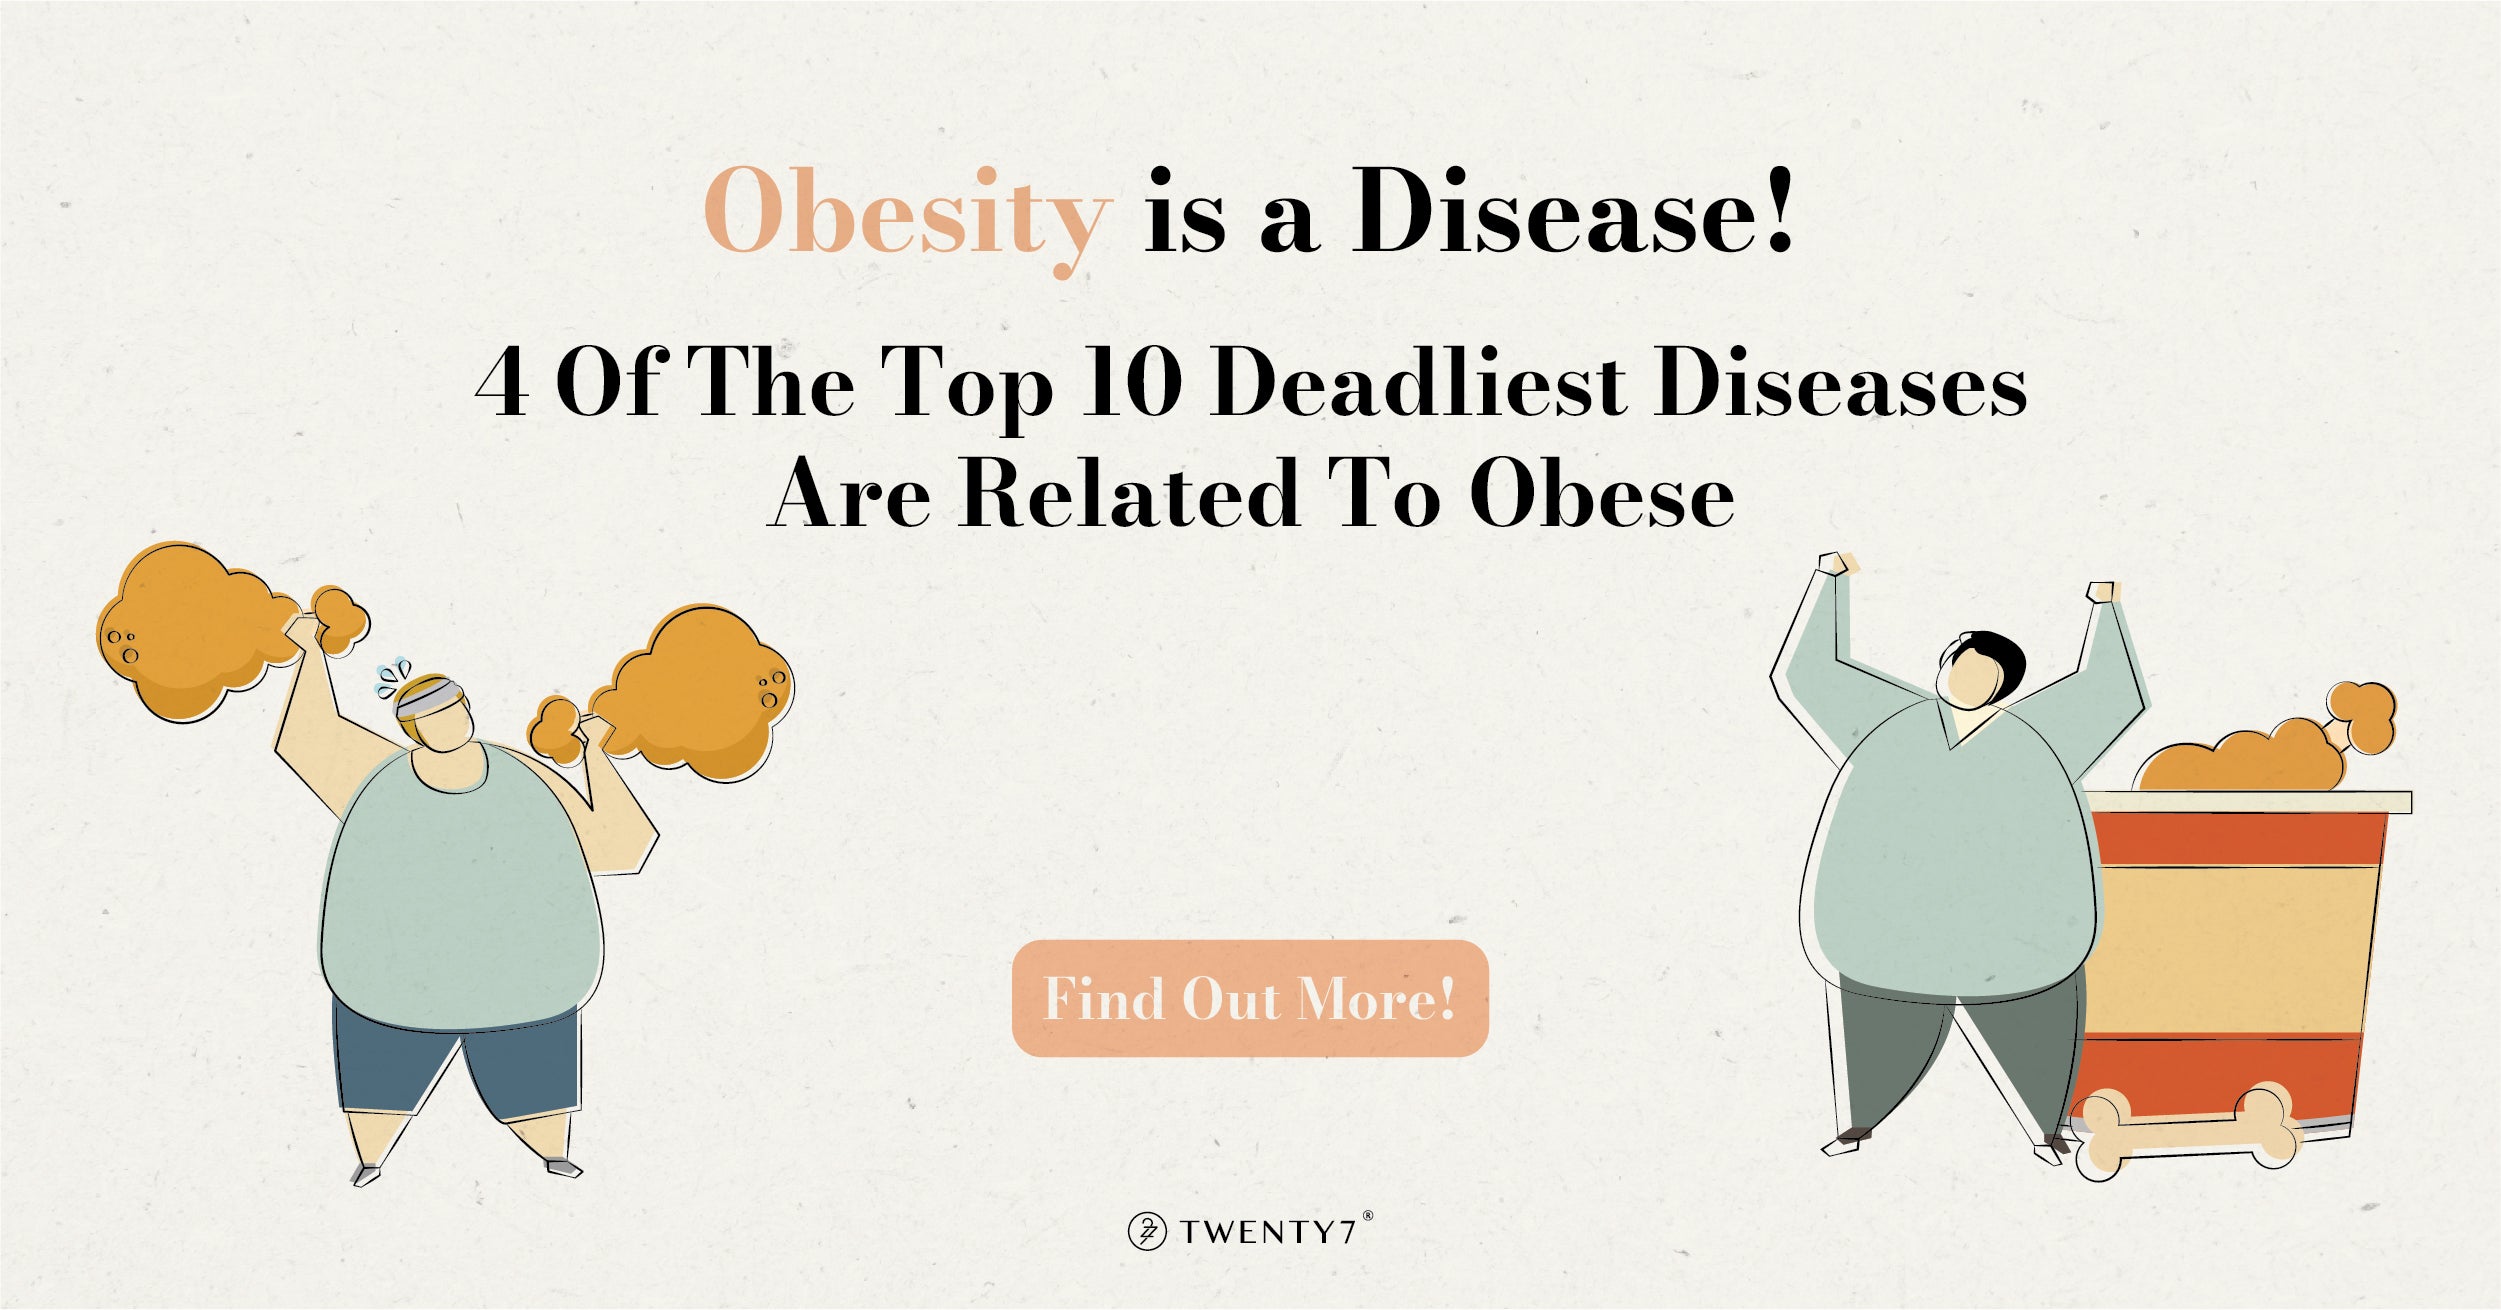 4 Of The Top 10 Deadliest Diseases Are Related To Obese